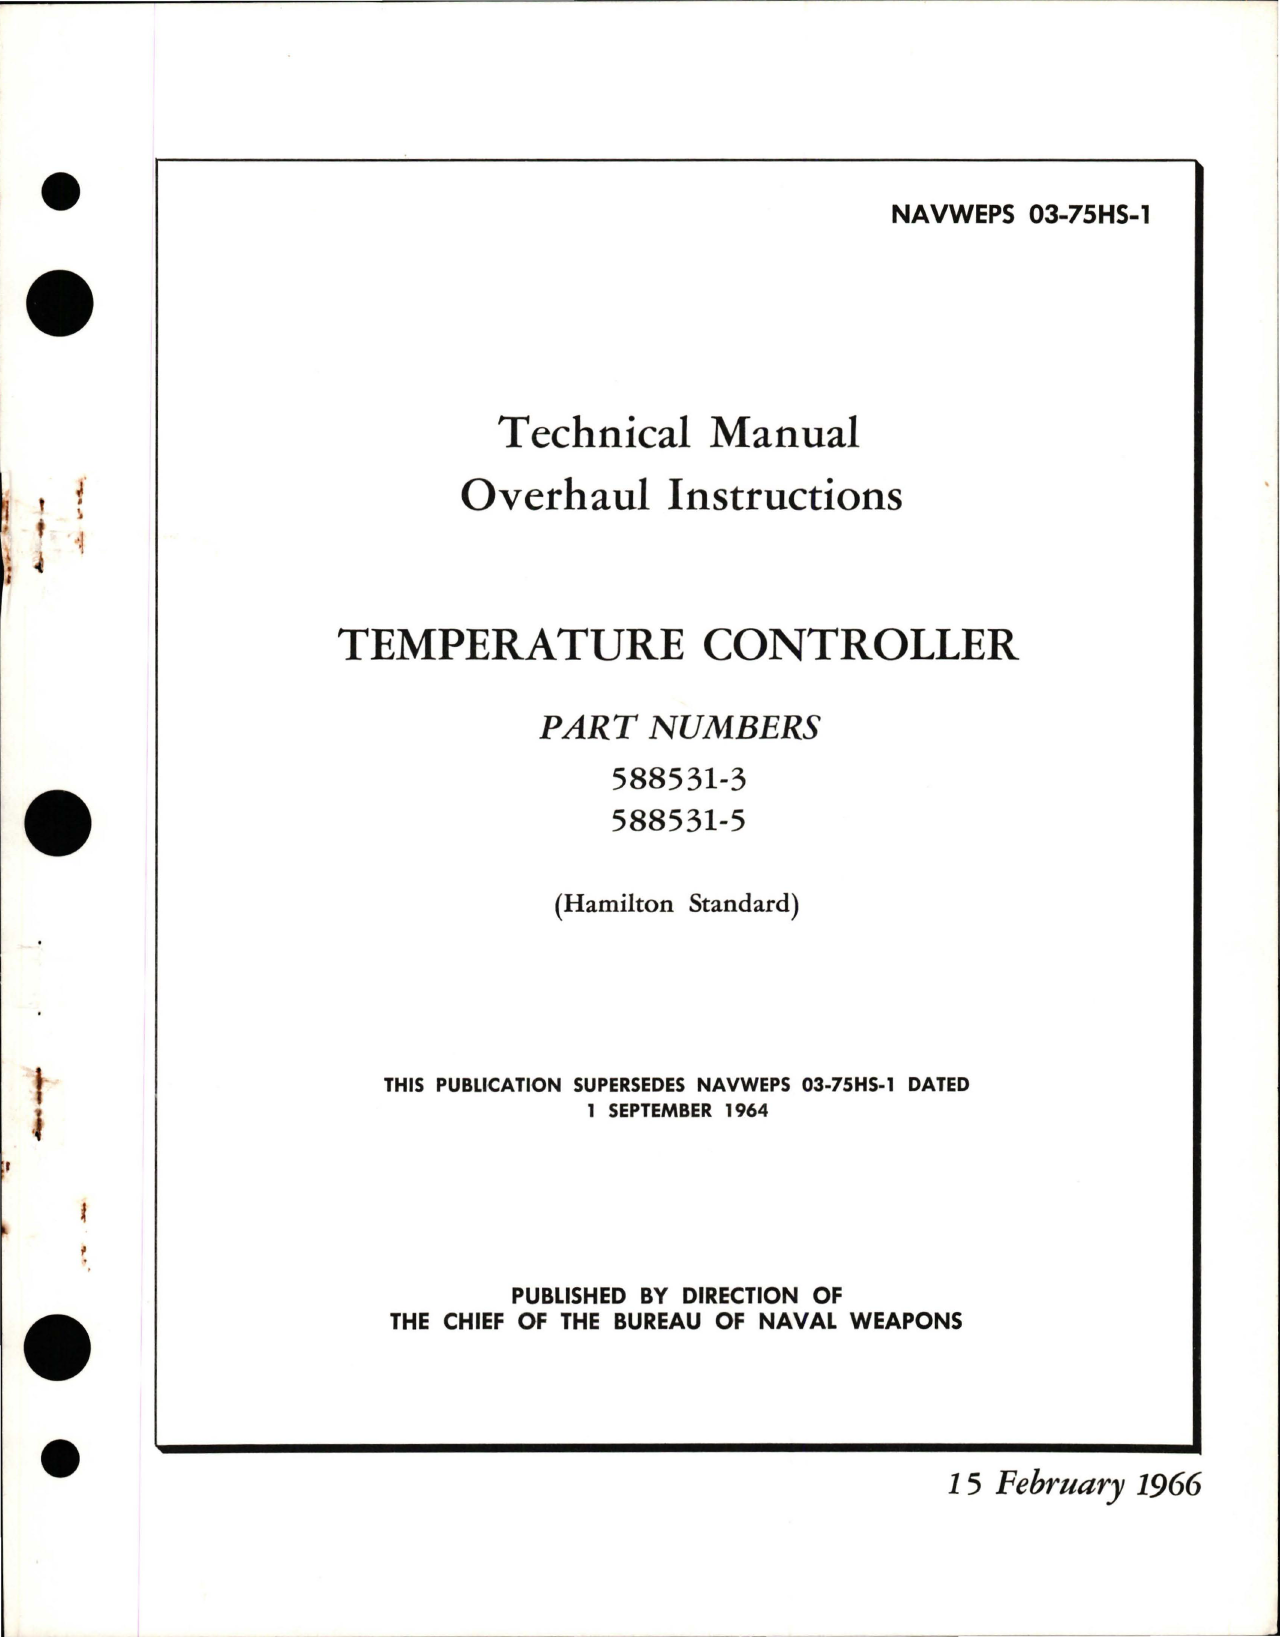 Sample page 1 from AirCorps Library document: Overhaul Instructions for Temperature Controller - Parts 588531-3 and 588531-5